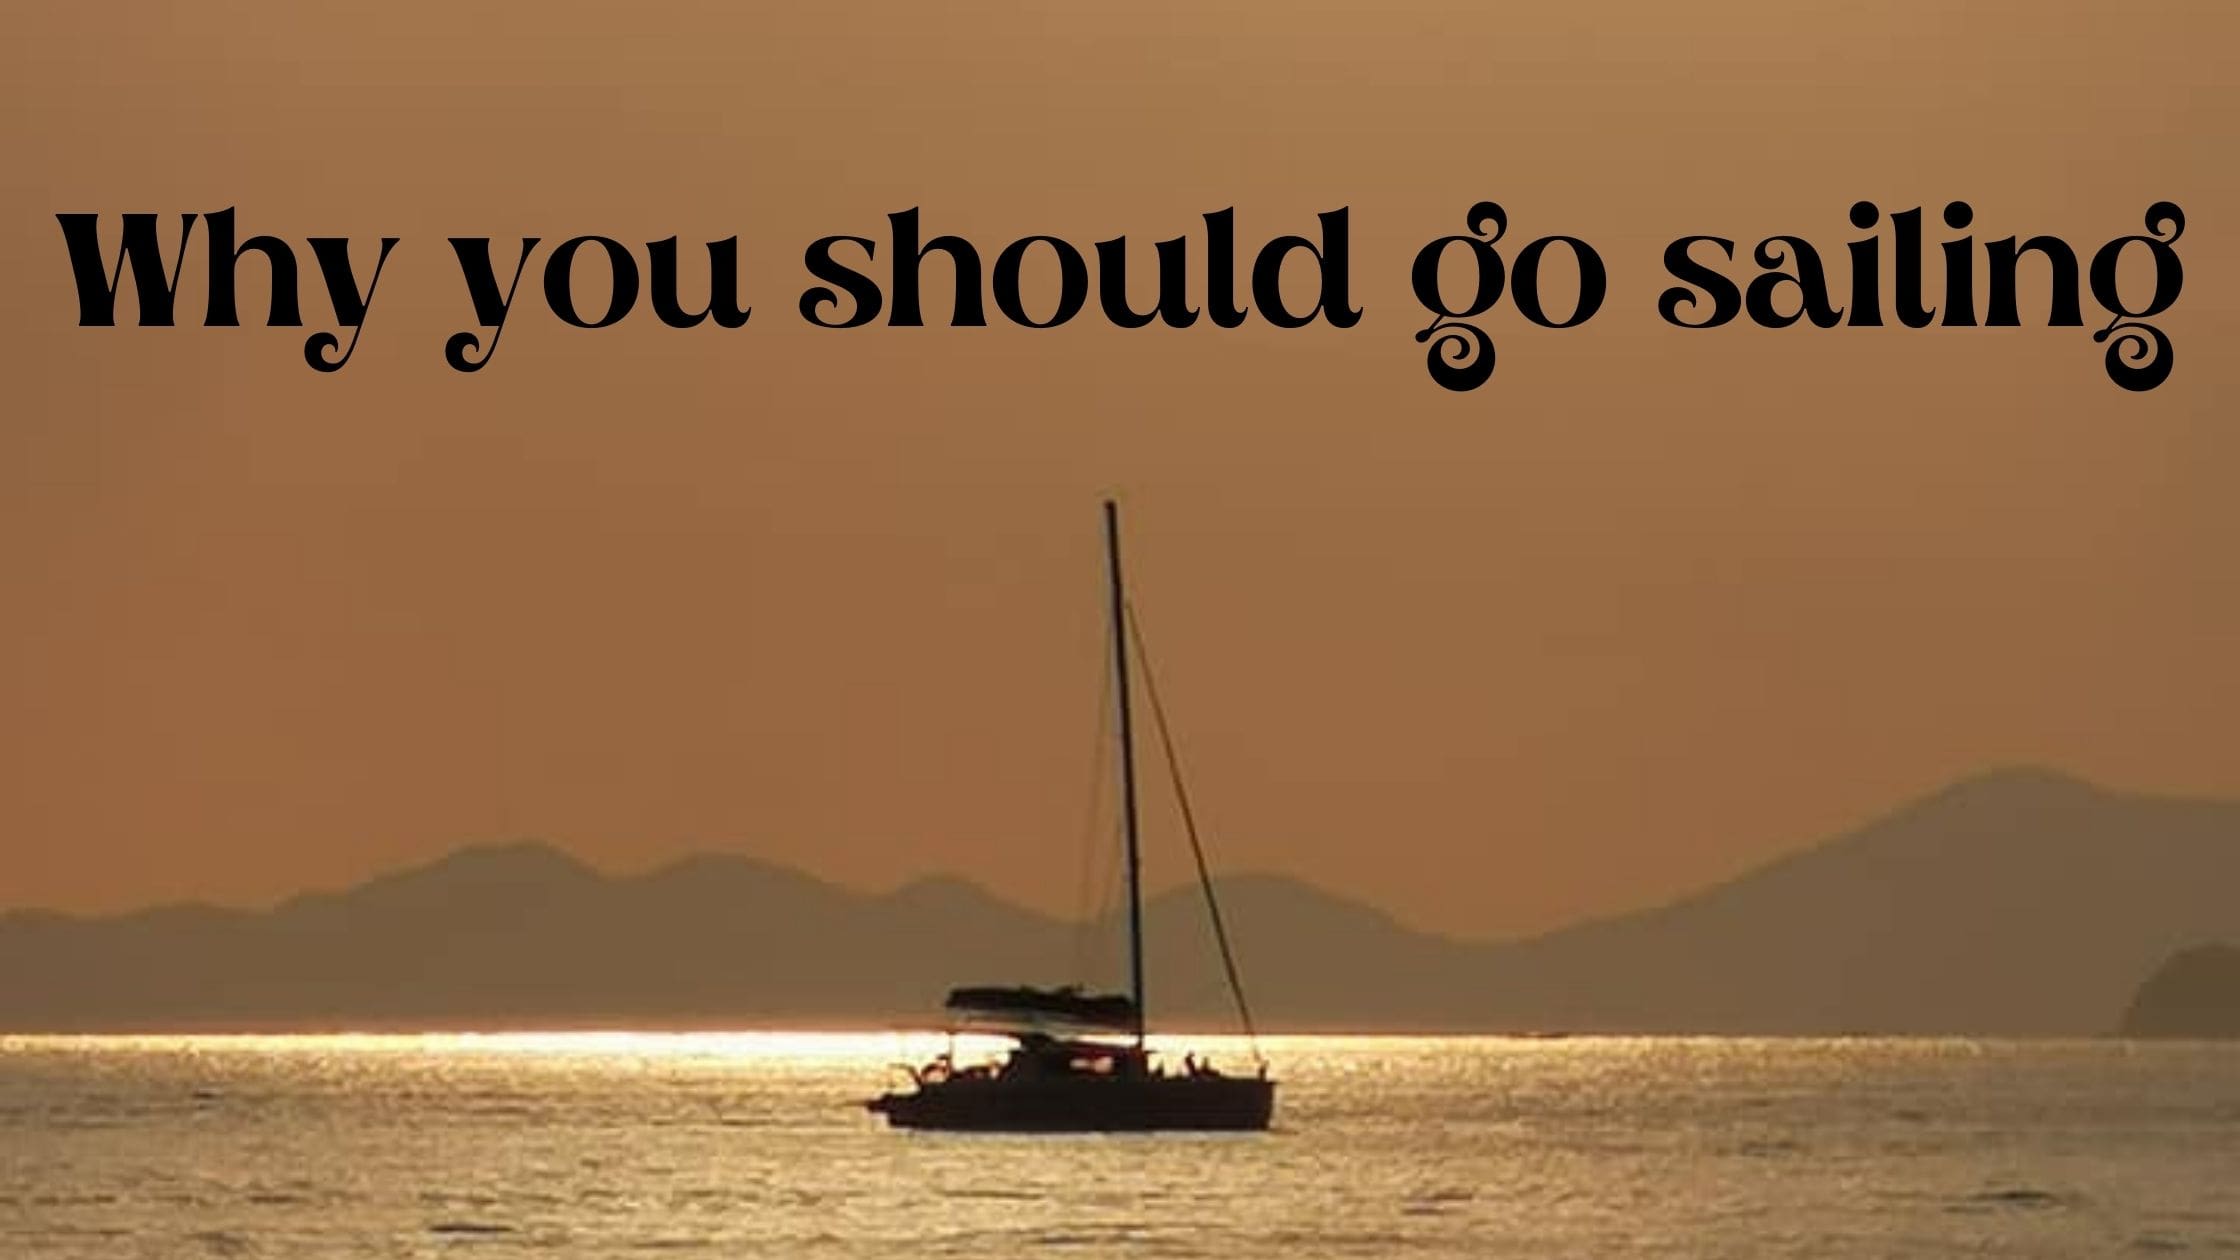 Why you should go sailing 2